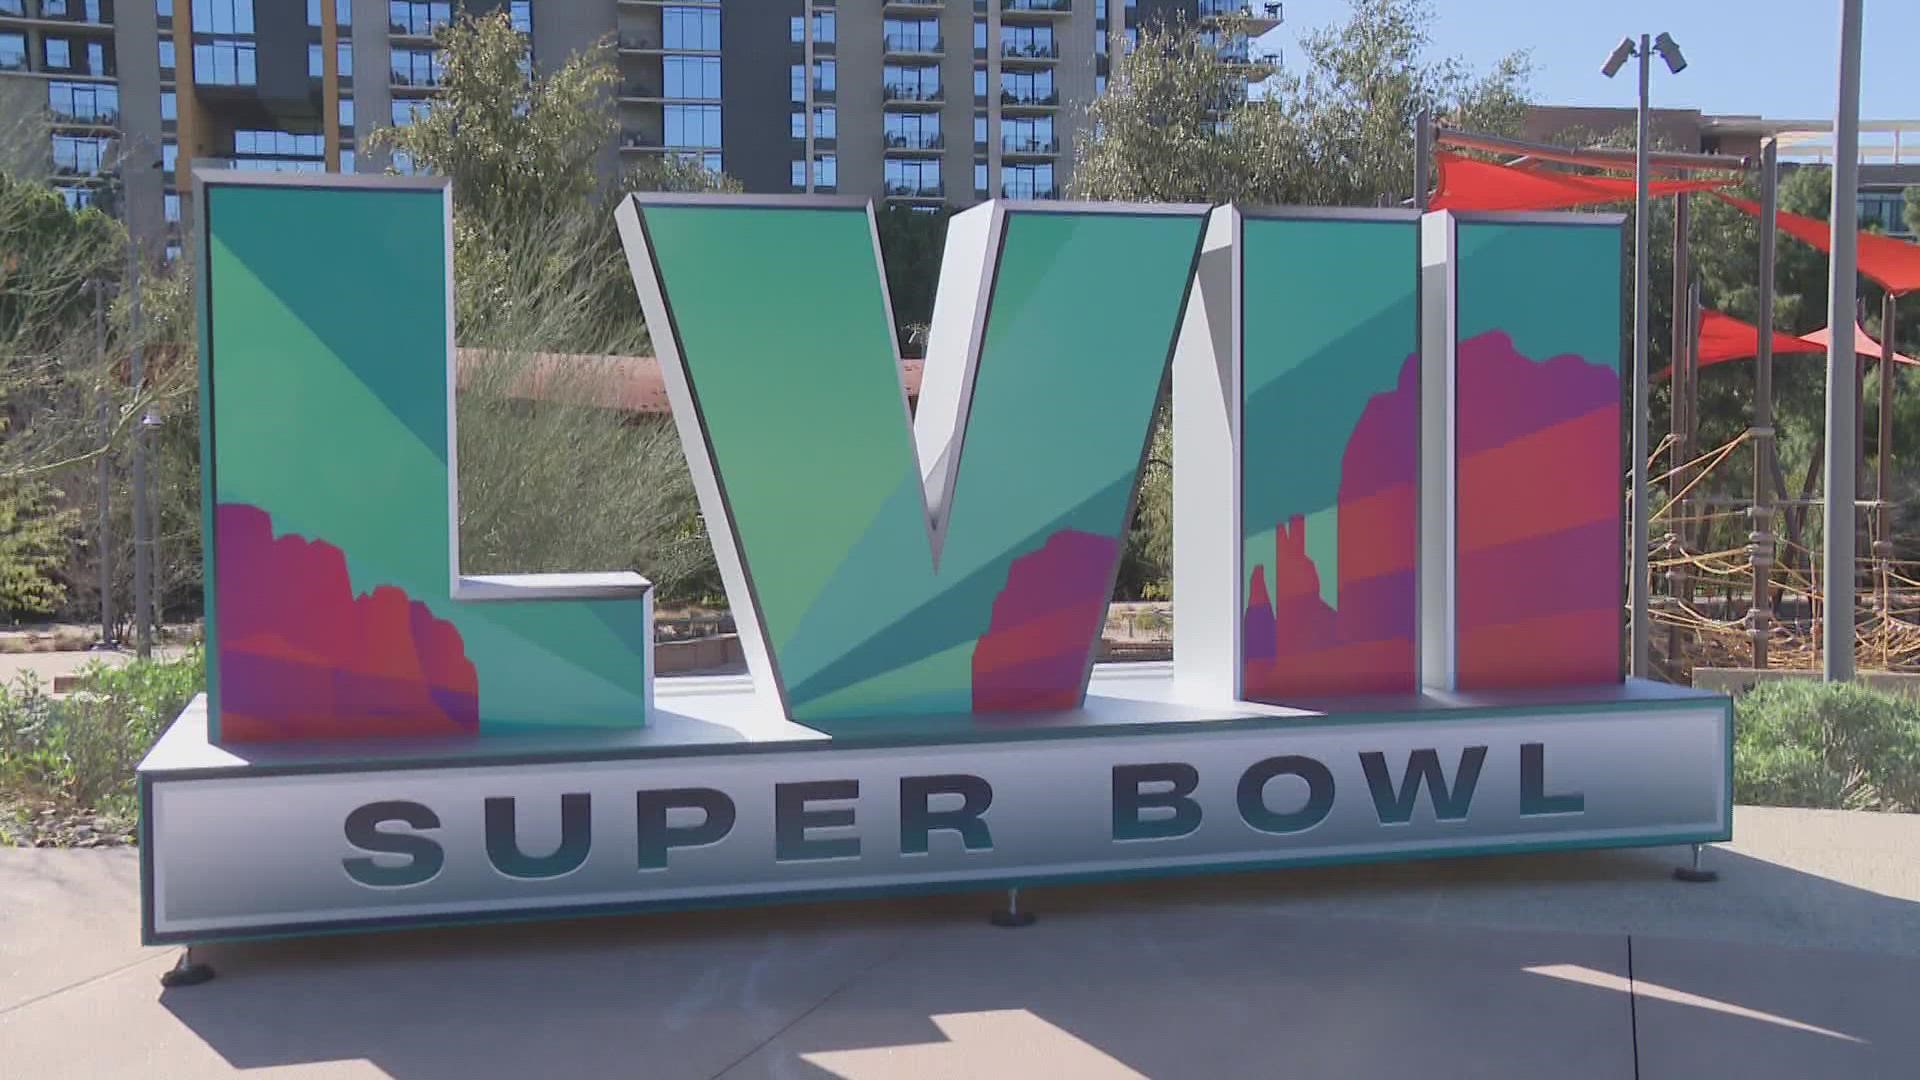 In a matter of days, the park will be home to the multi-day Super Bowl Experience presented by Lowes.